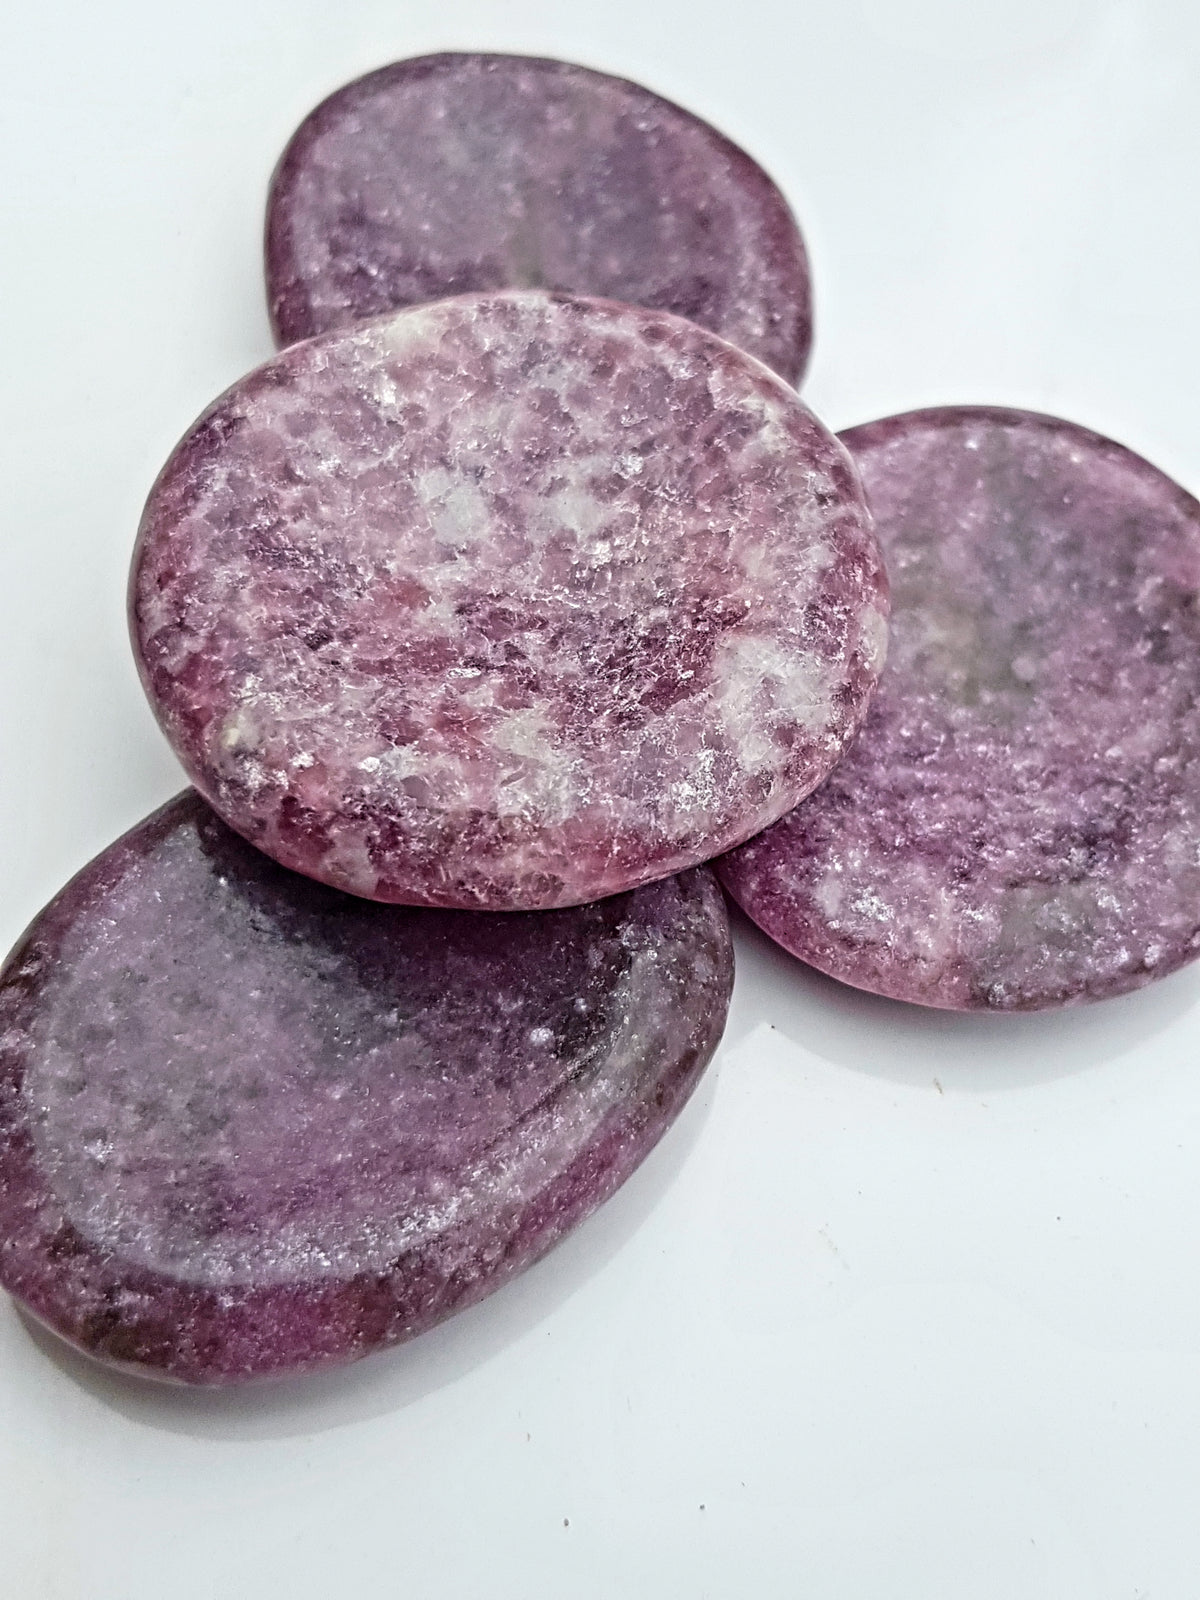 Lepidolite worry stone - The Science of Magic 